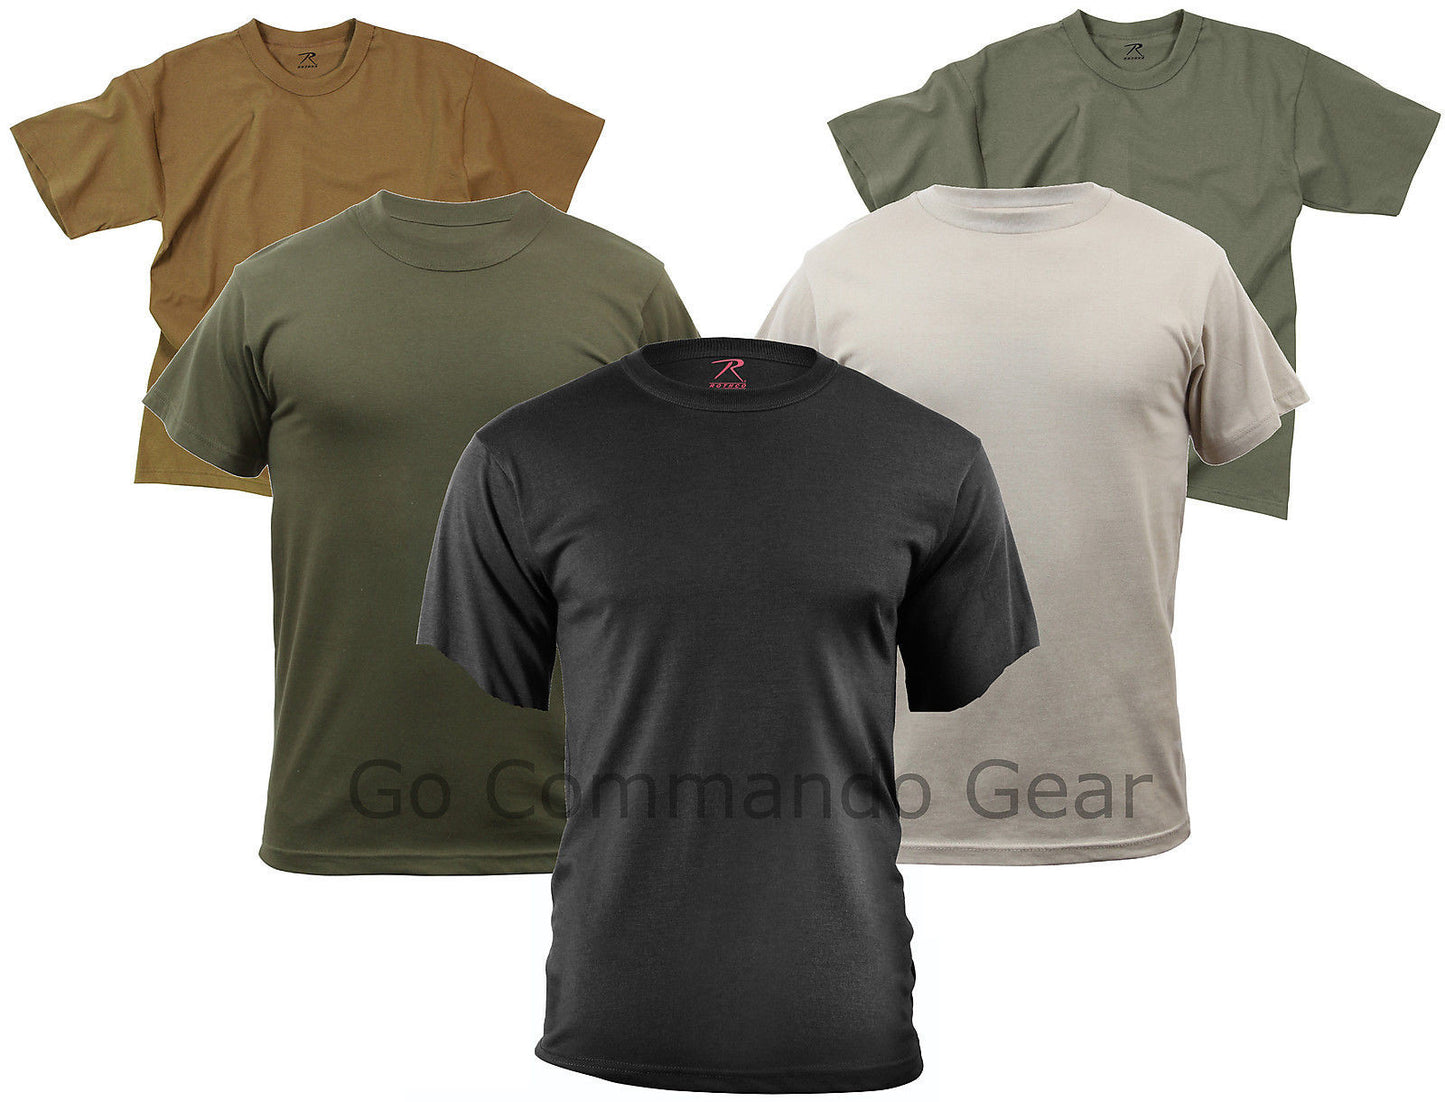 T-Shirt Variety 5 Pack All Five Solid Color 100% Cotton Short Sleeve Tees